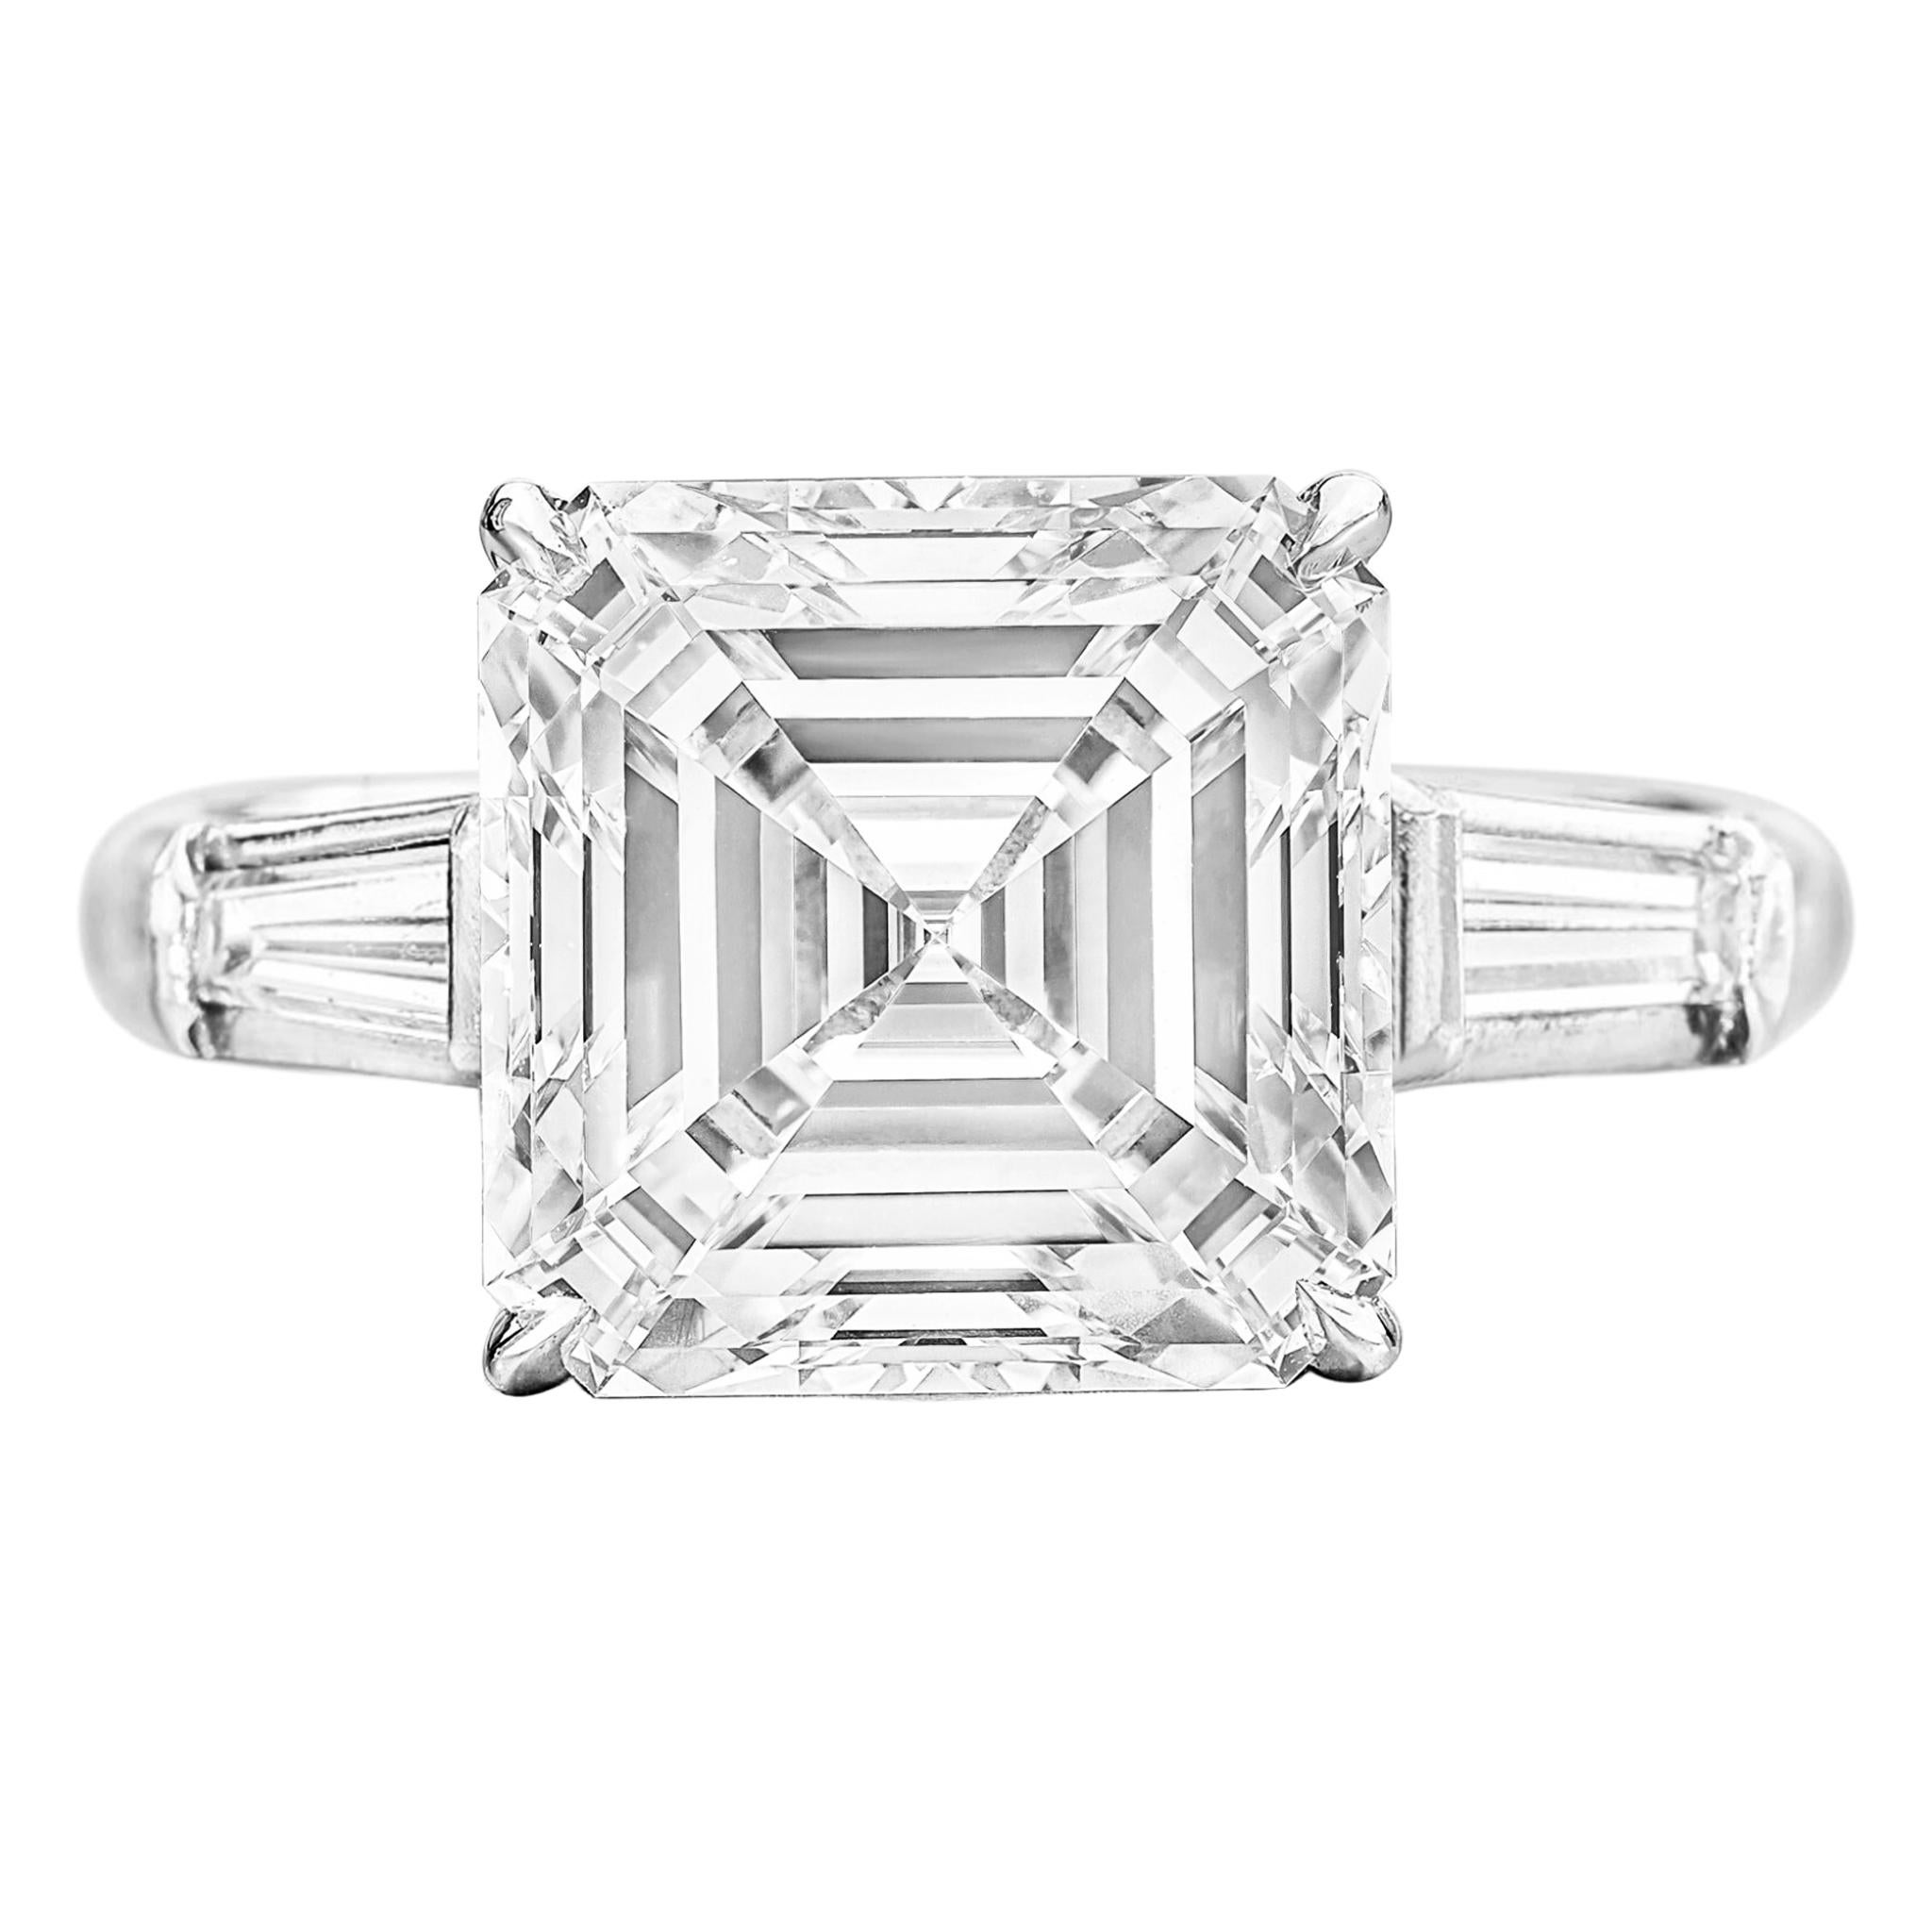 This exquisite ring features a stunning 3-carat emerald square-cut diamond, certified by the Gemological Institute of America (GIA). The GIA certification ensures the diamond's exceptional E color grade, indicating a rare and highly desirable level